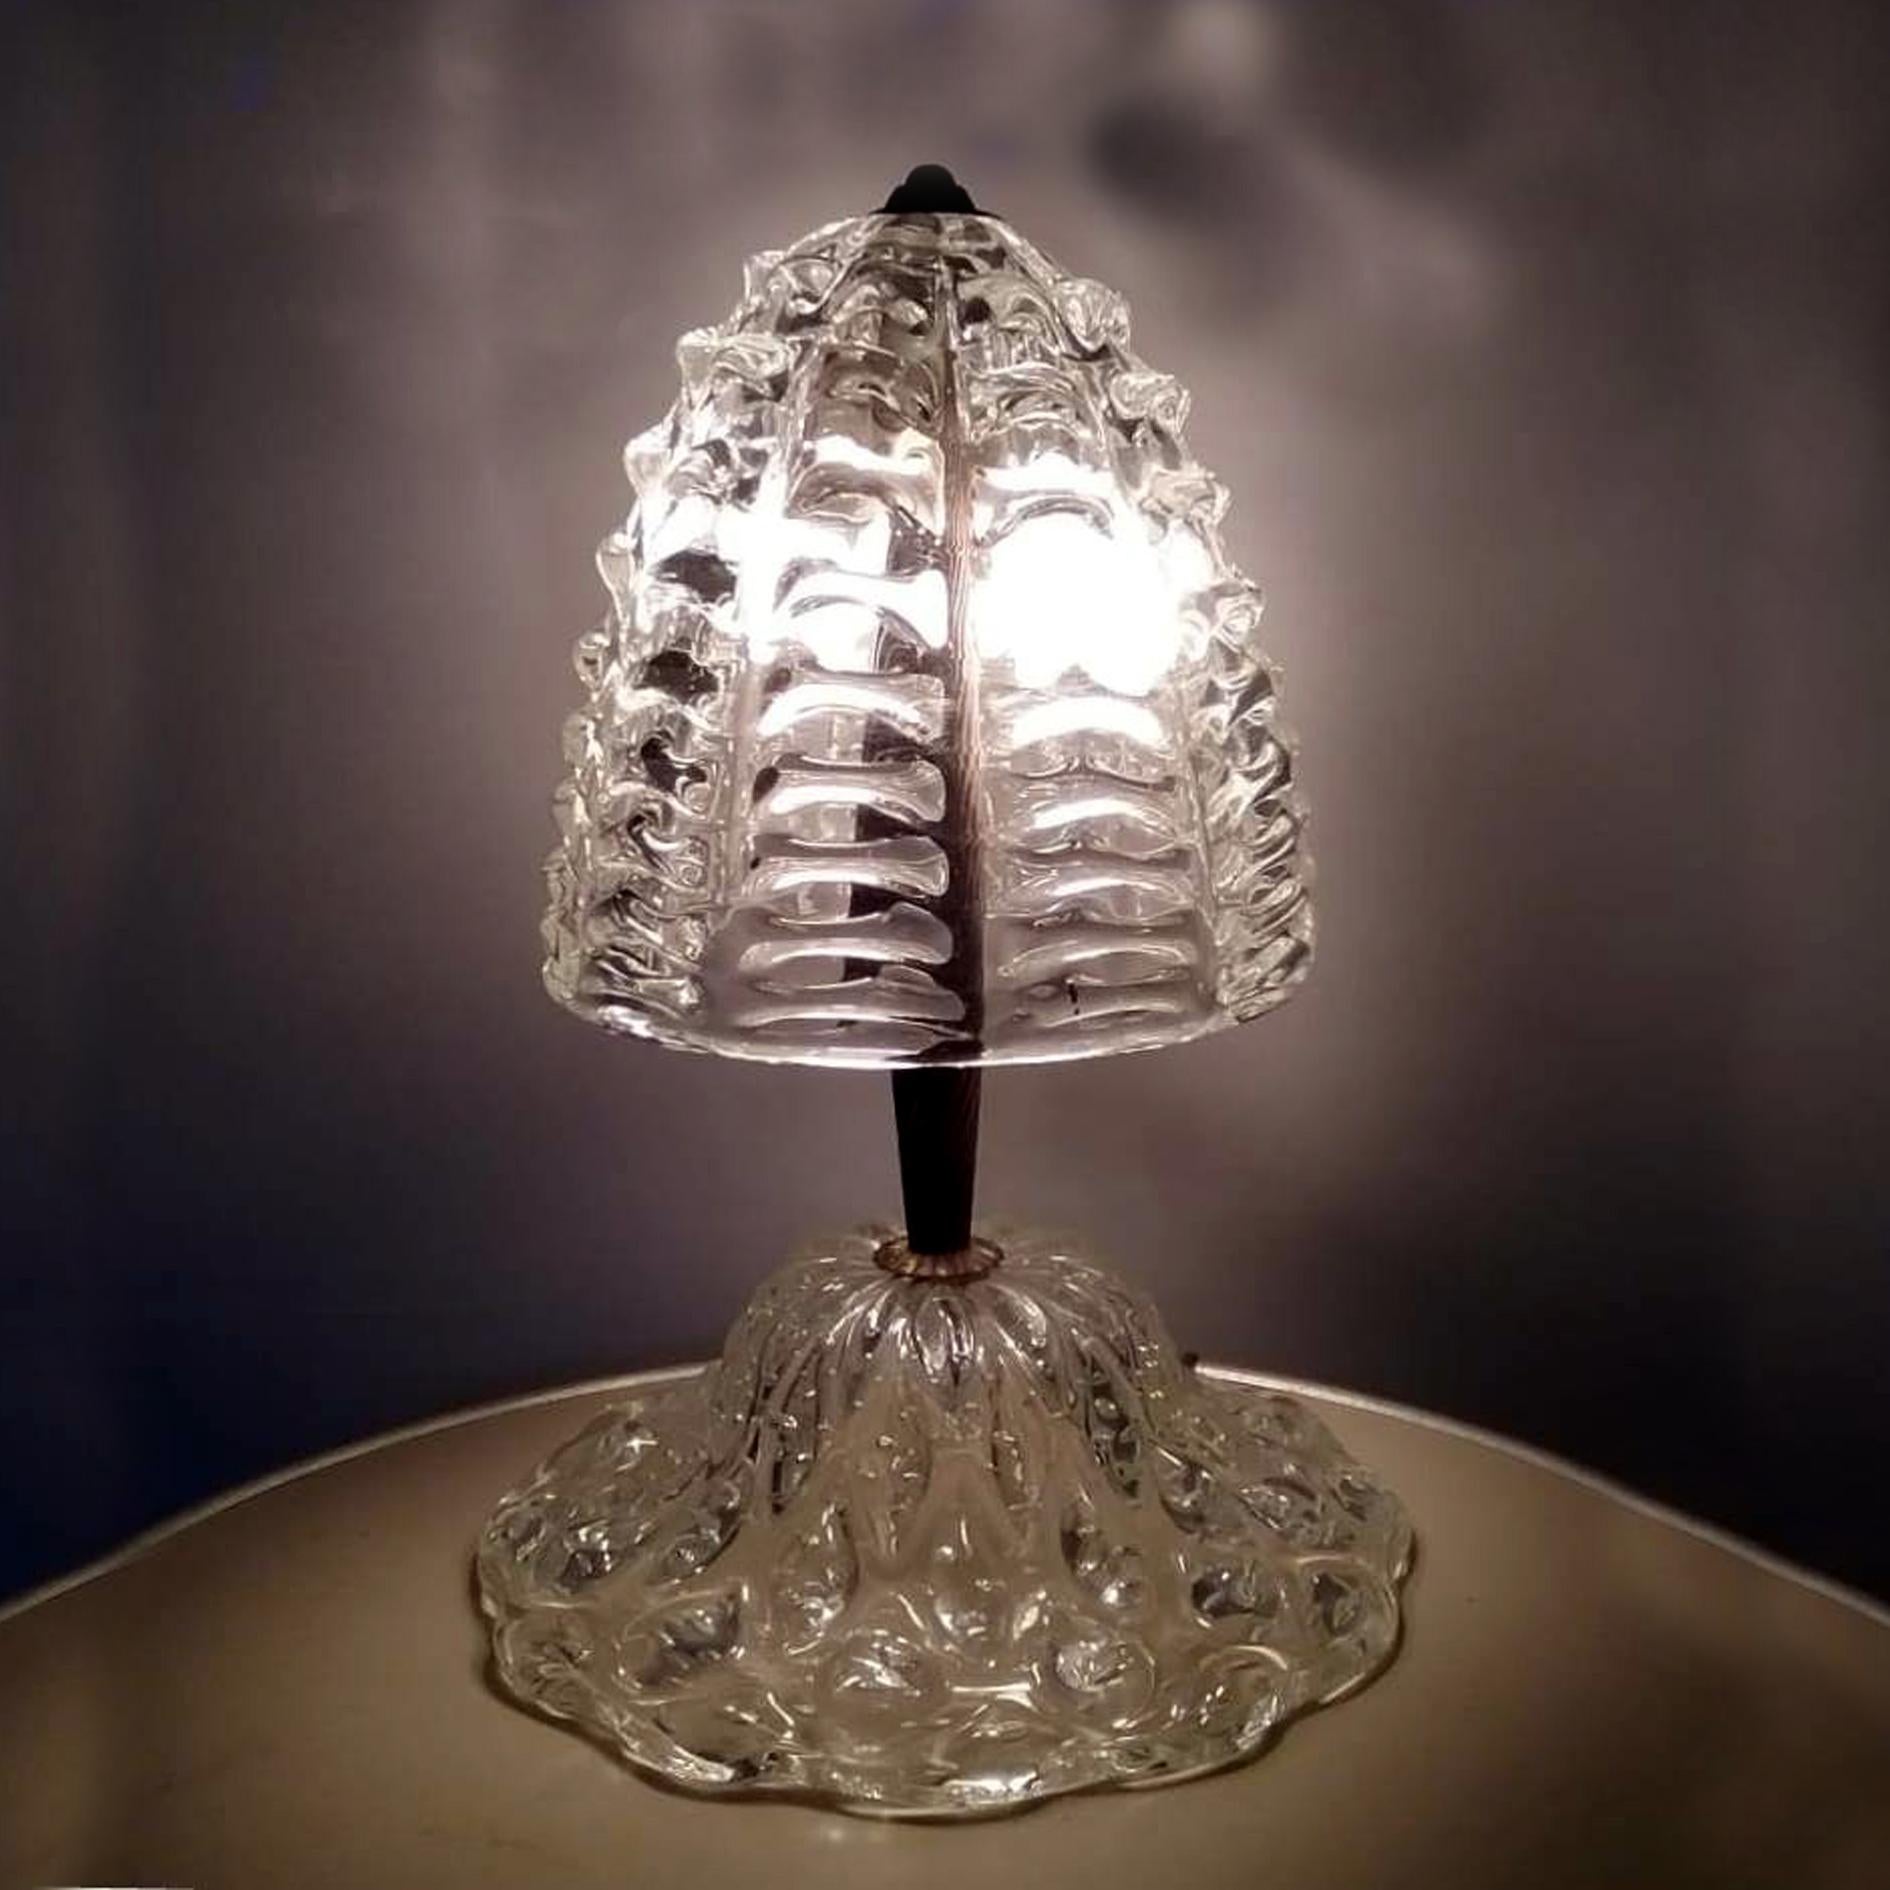 Barovier Murano table lamp in original condition.
Two E14 light bulb fittings. Light bulbs not included.